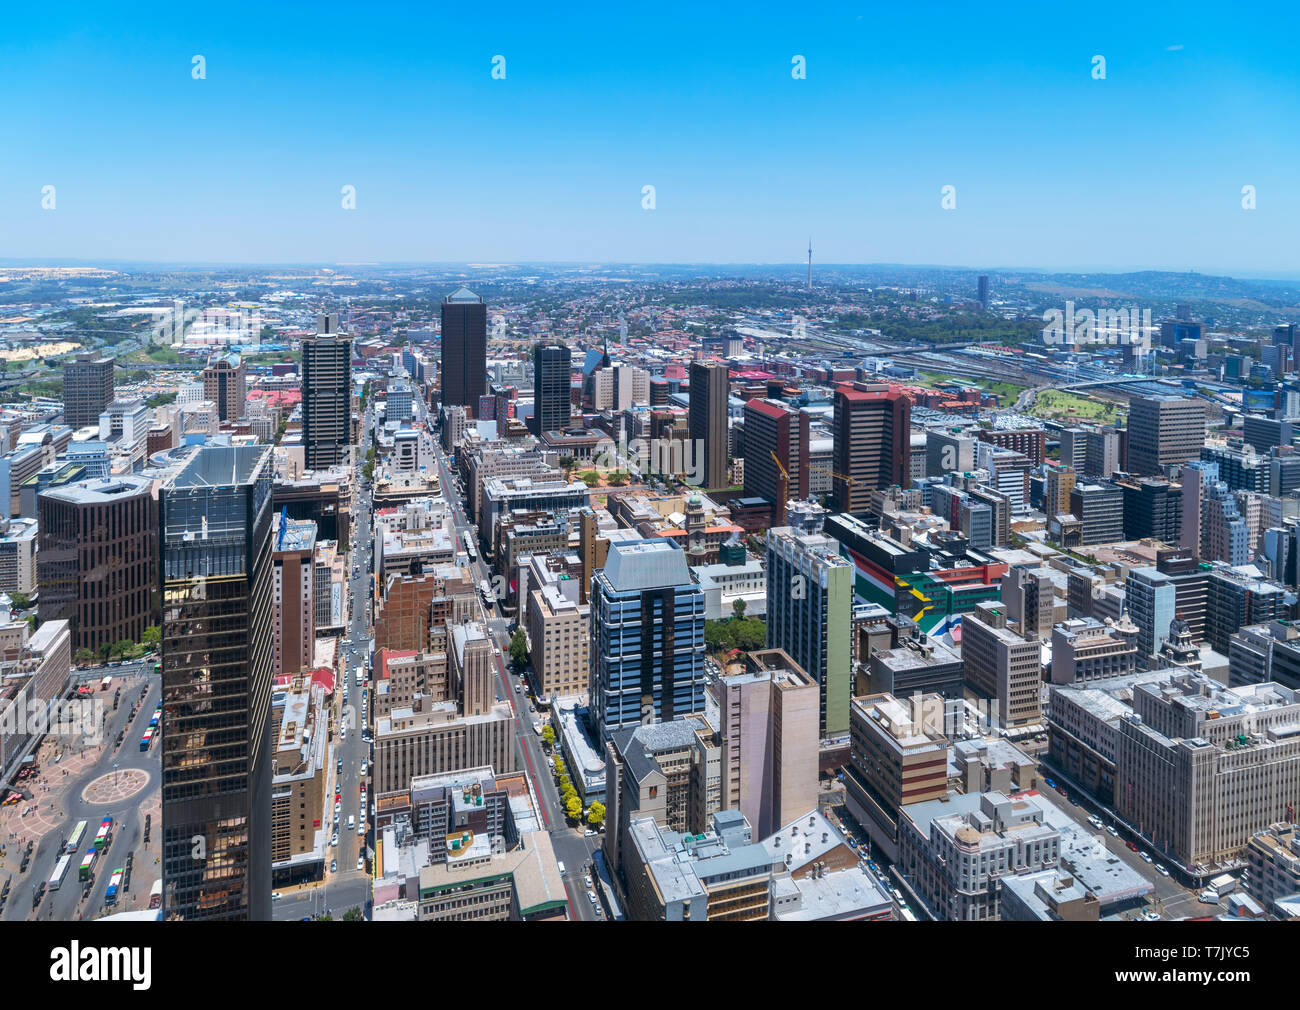 Johannesburg skyline. Aerial view over the Central Business District (CBD) from the Carlton Tower, Johannesburg, South Africa. Stock Photo